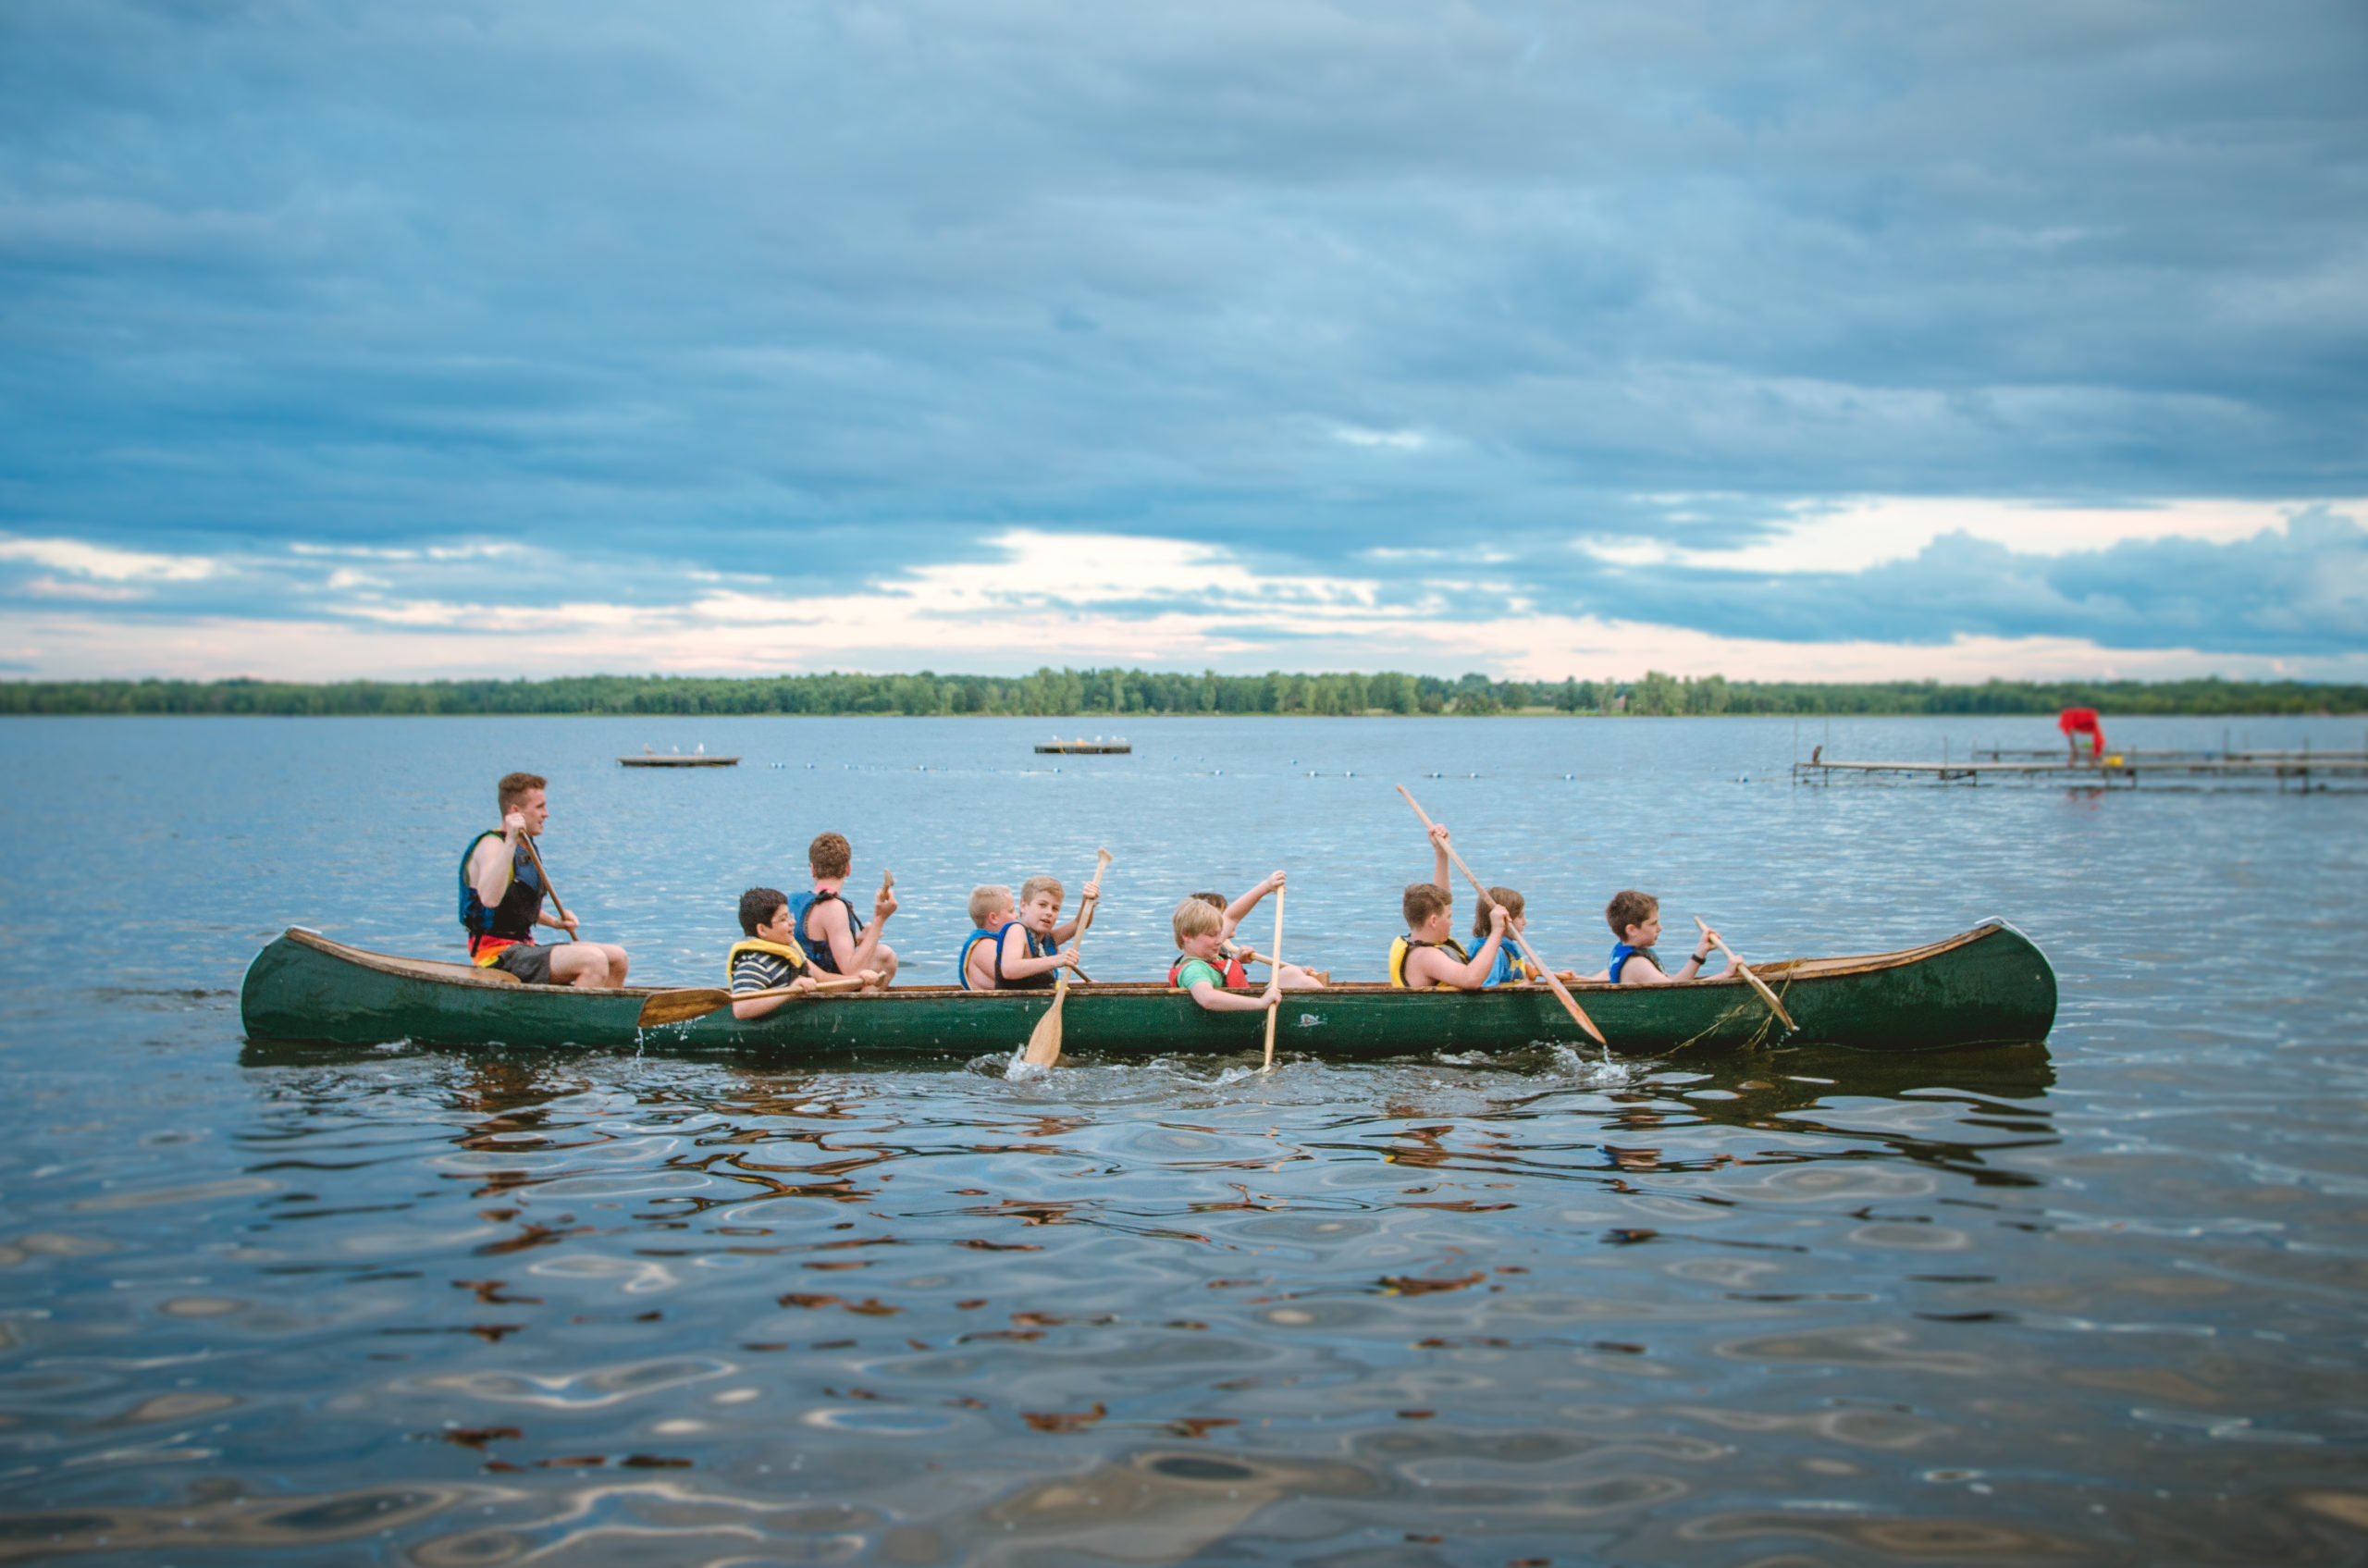 A counselor and a group of boys rowing in a kayak